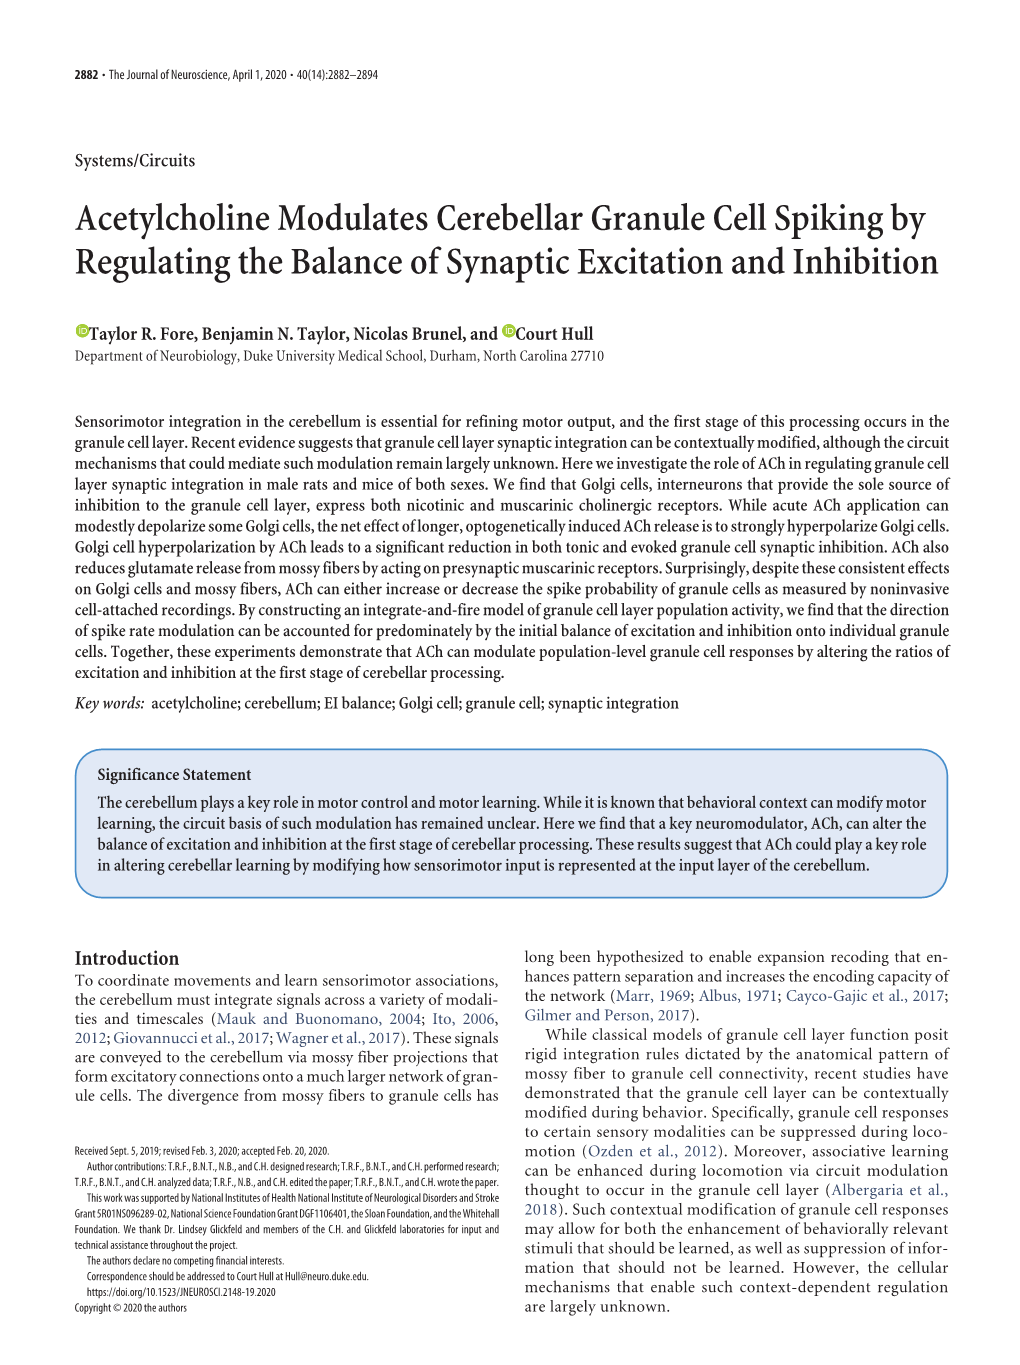 Acetylcholine Modulates Cerebellar Granule Cell Spiking by Regulating the Balance of Synaptic Excitation and Inhibition